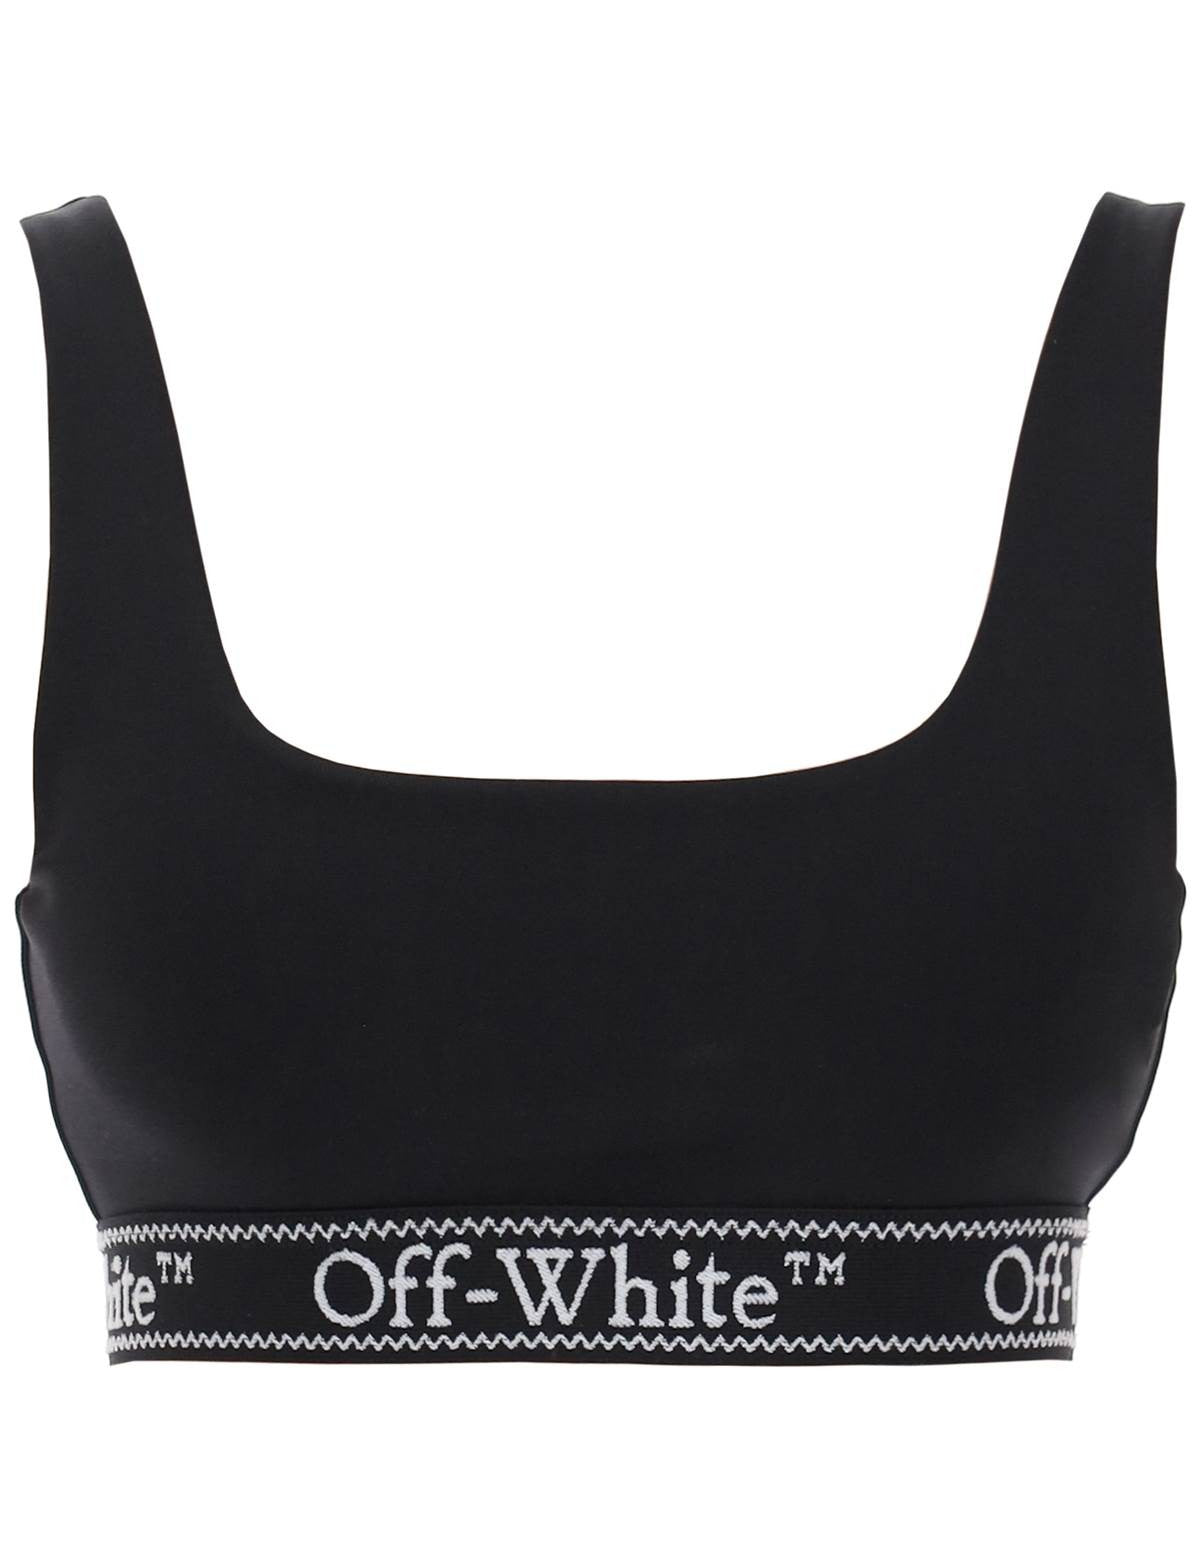 off-white-sport-bra-with-branded-band.jpg